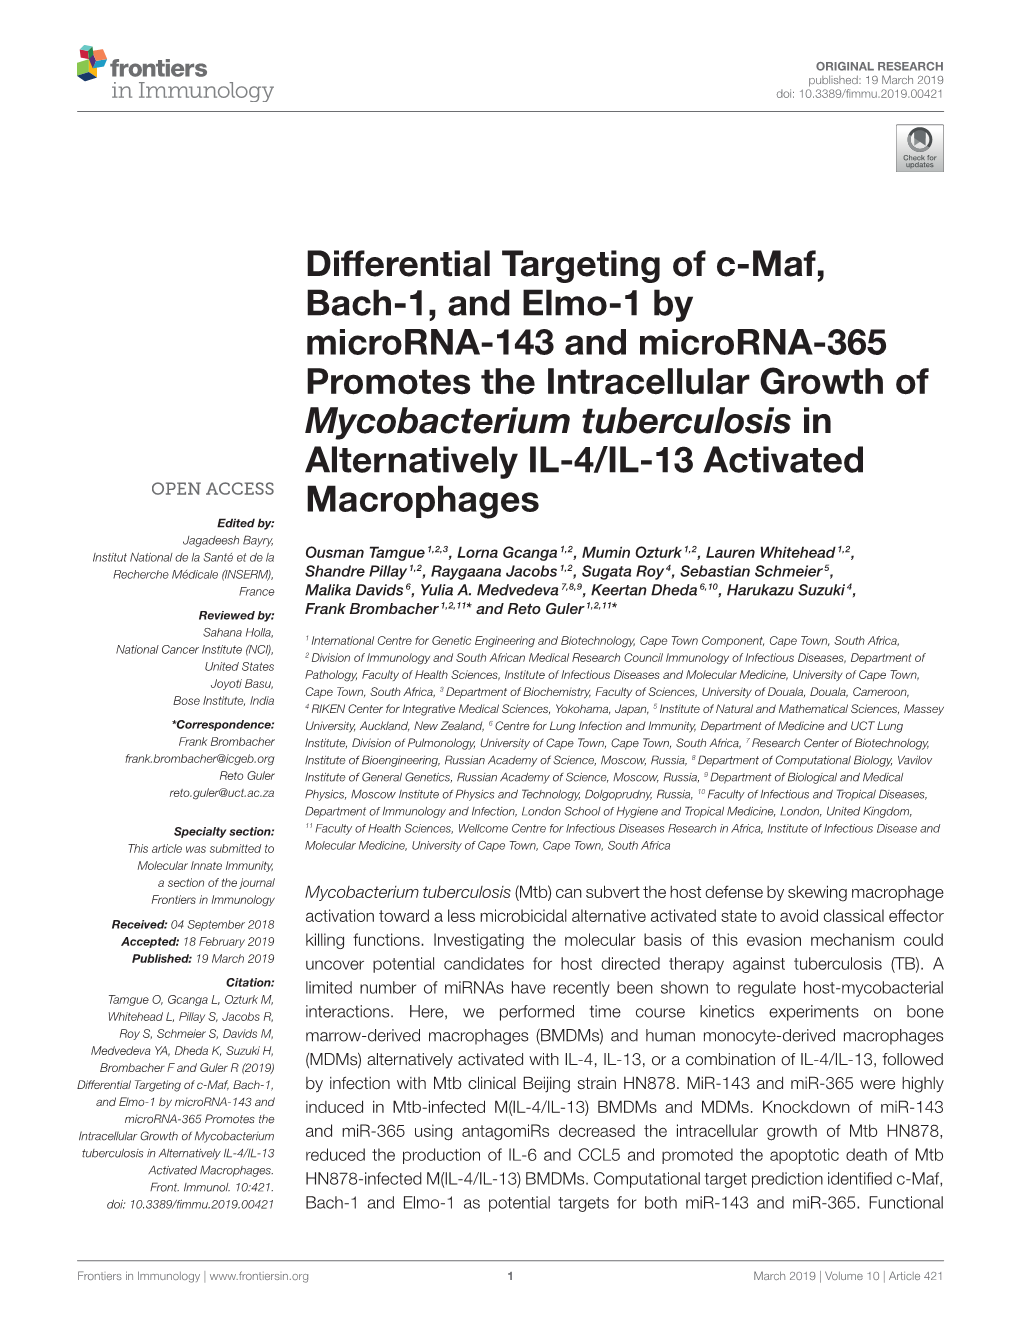 Differential Targeting of C-Maf, Bach-1, and Elmo-1 by Microrna